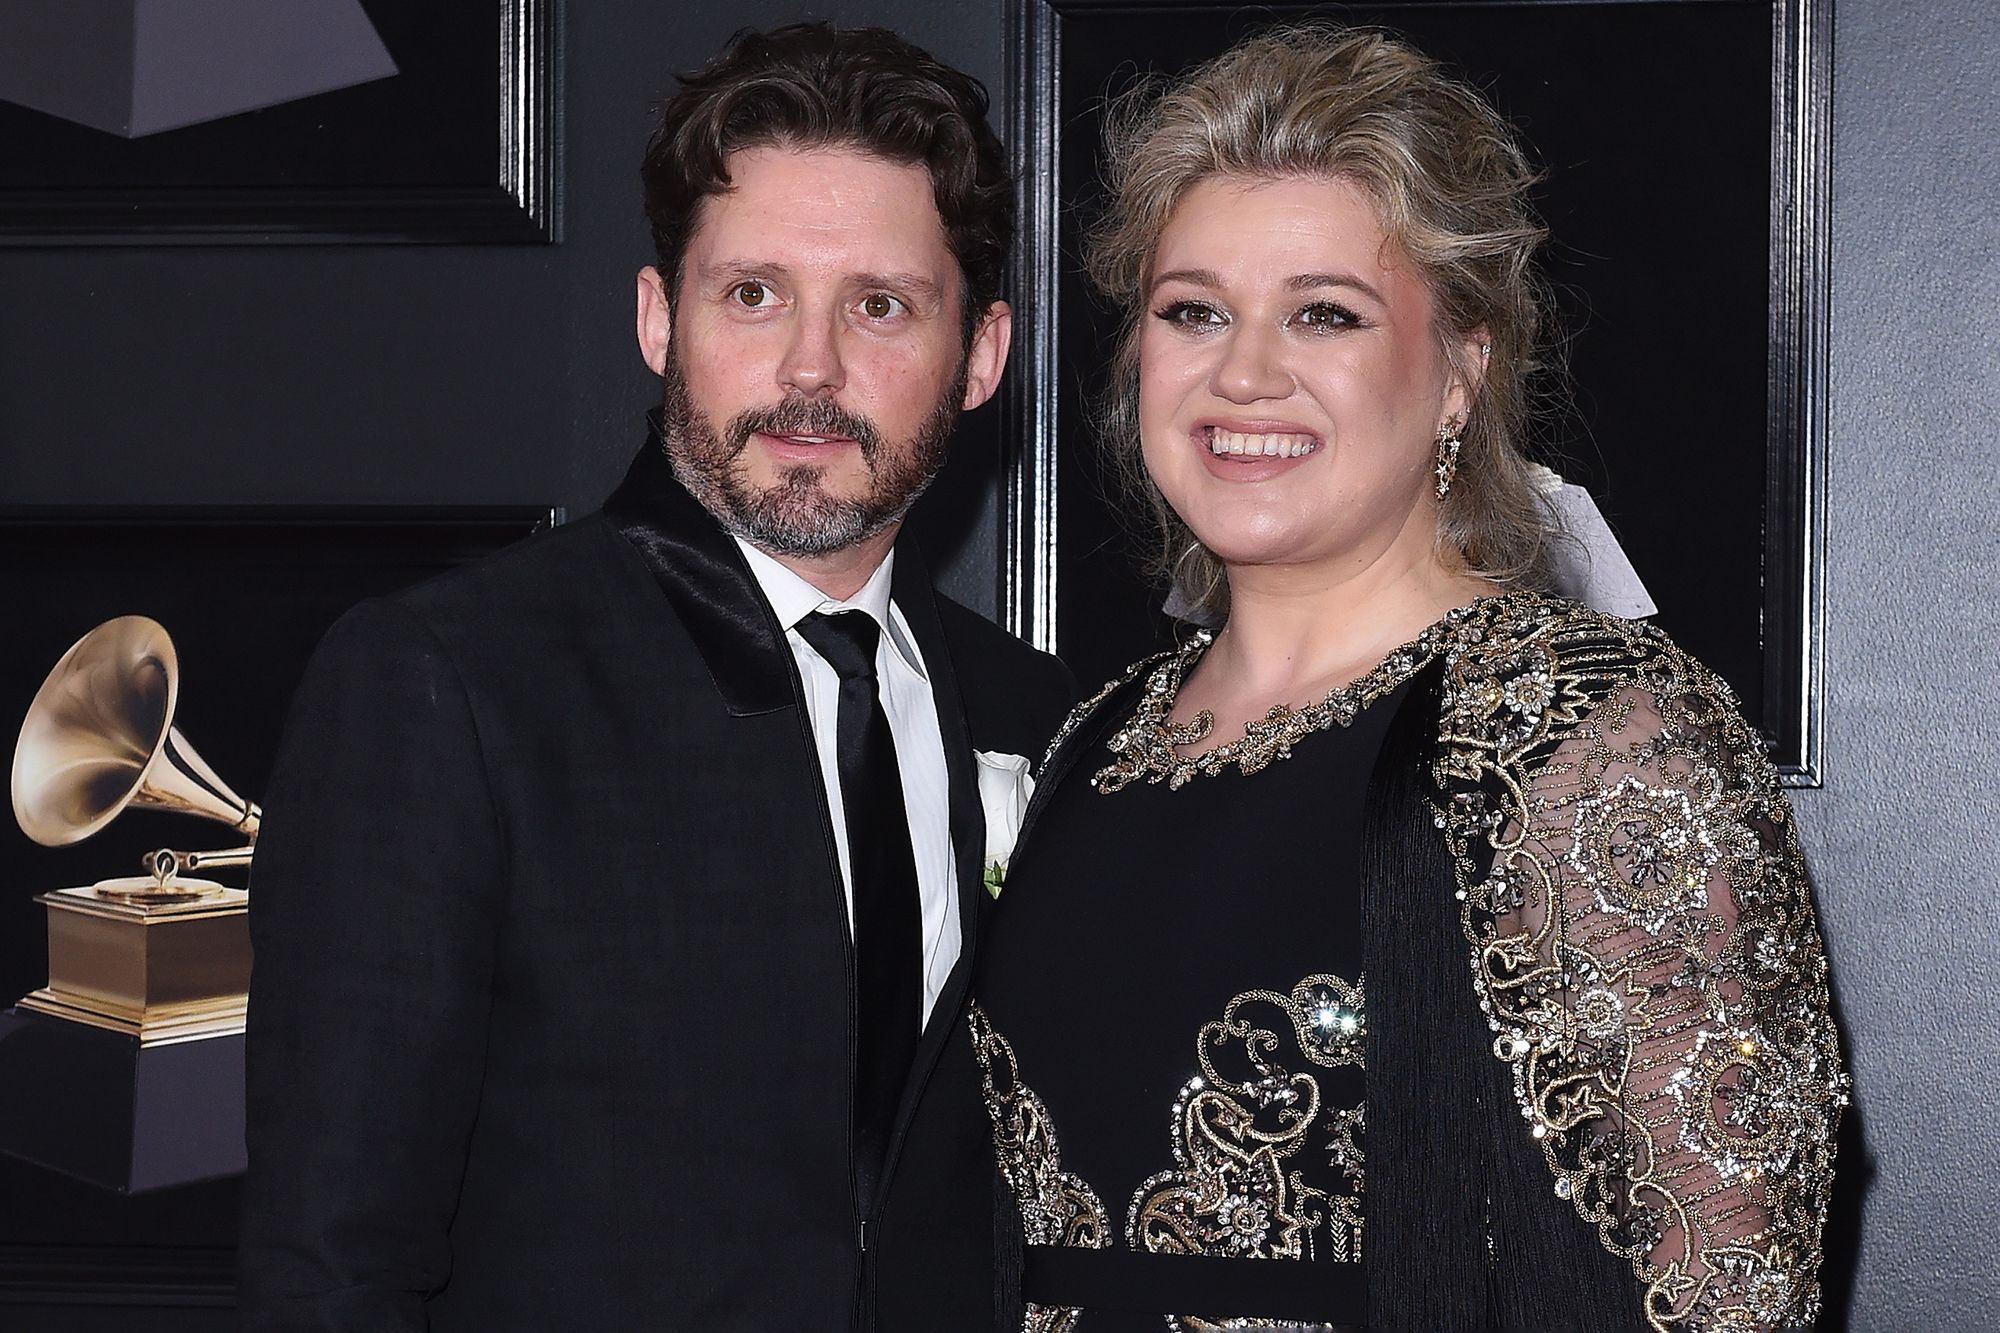 Kelly Clarkson Brandon Blackstock Celebrity Ultimate Revenge On Ex By Booting Him Off Ranch?